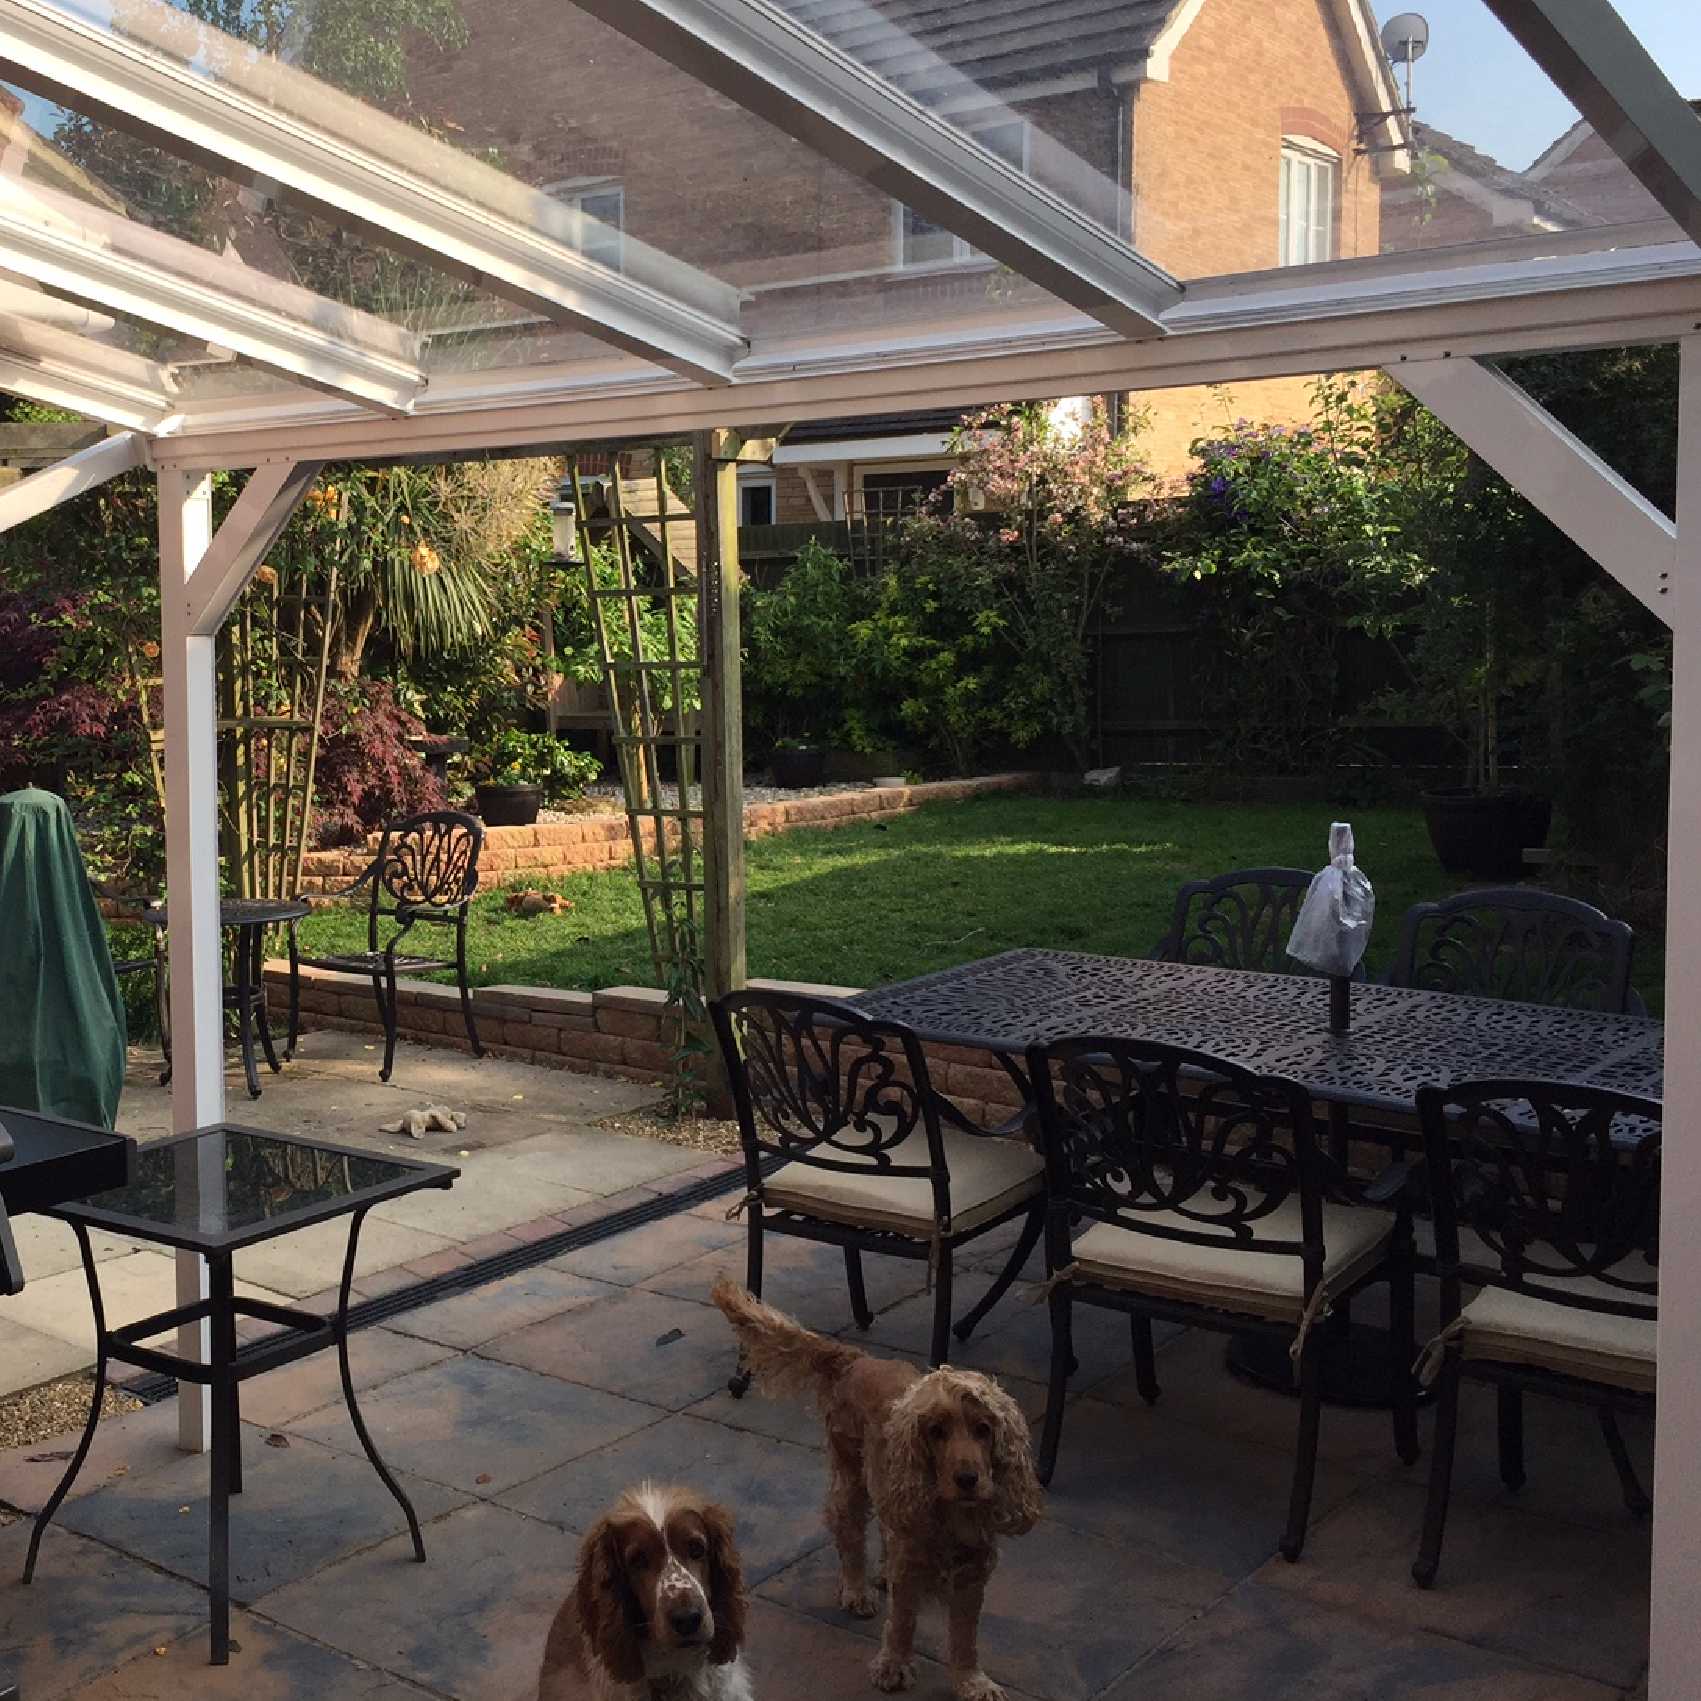 Affordable Omega Smart Lean-To Canopy, White UNGLAZED for 6mm Glazing - 3.5m (W) x 2.0m (P), (3) Supporting Posts